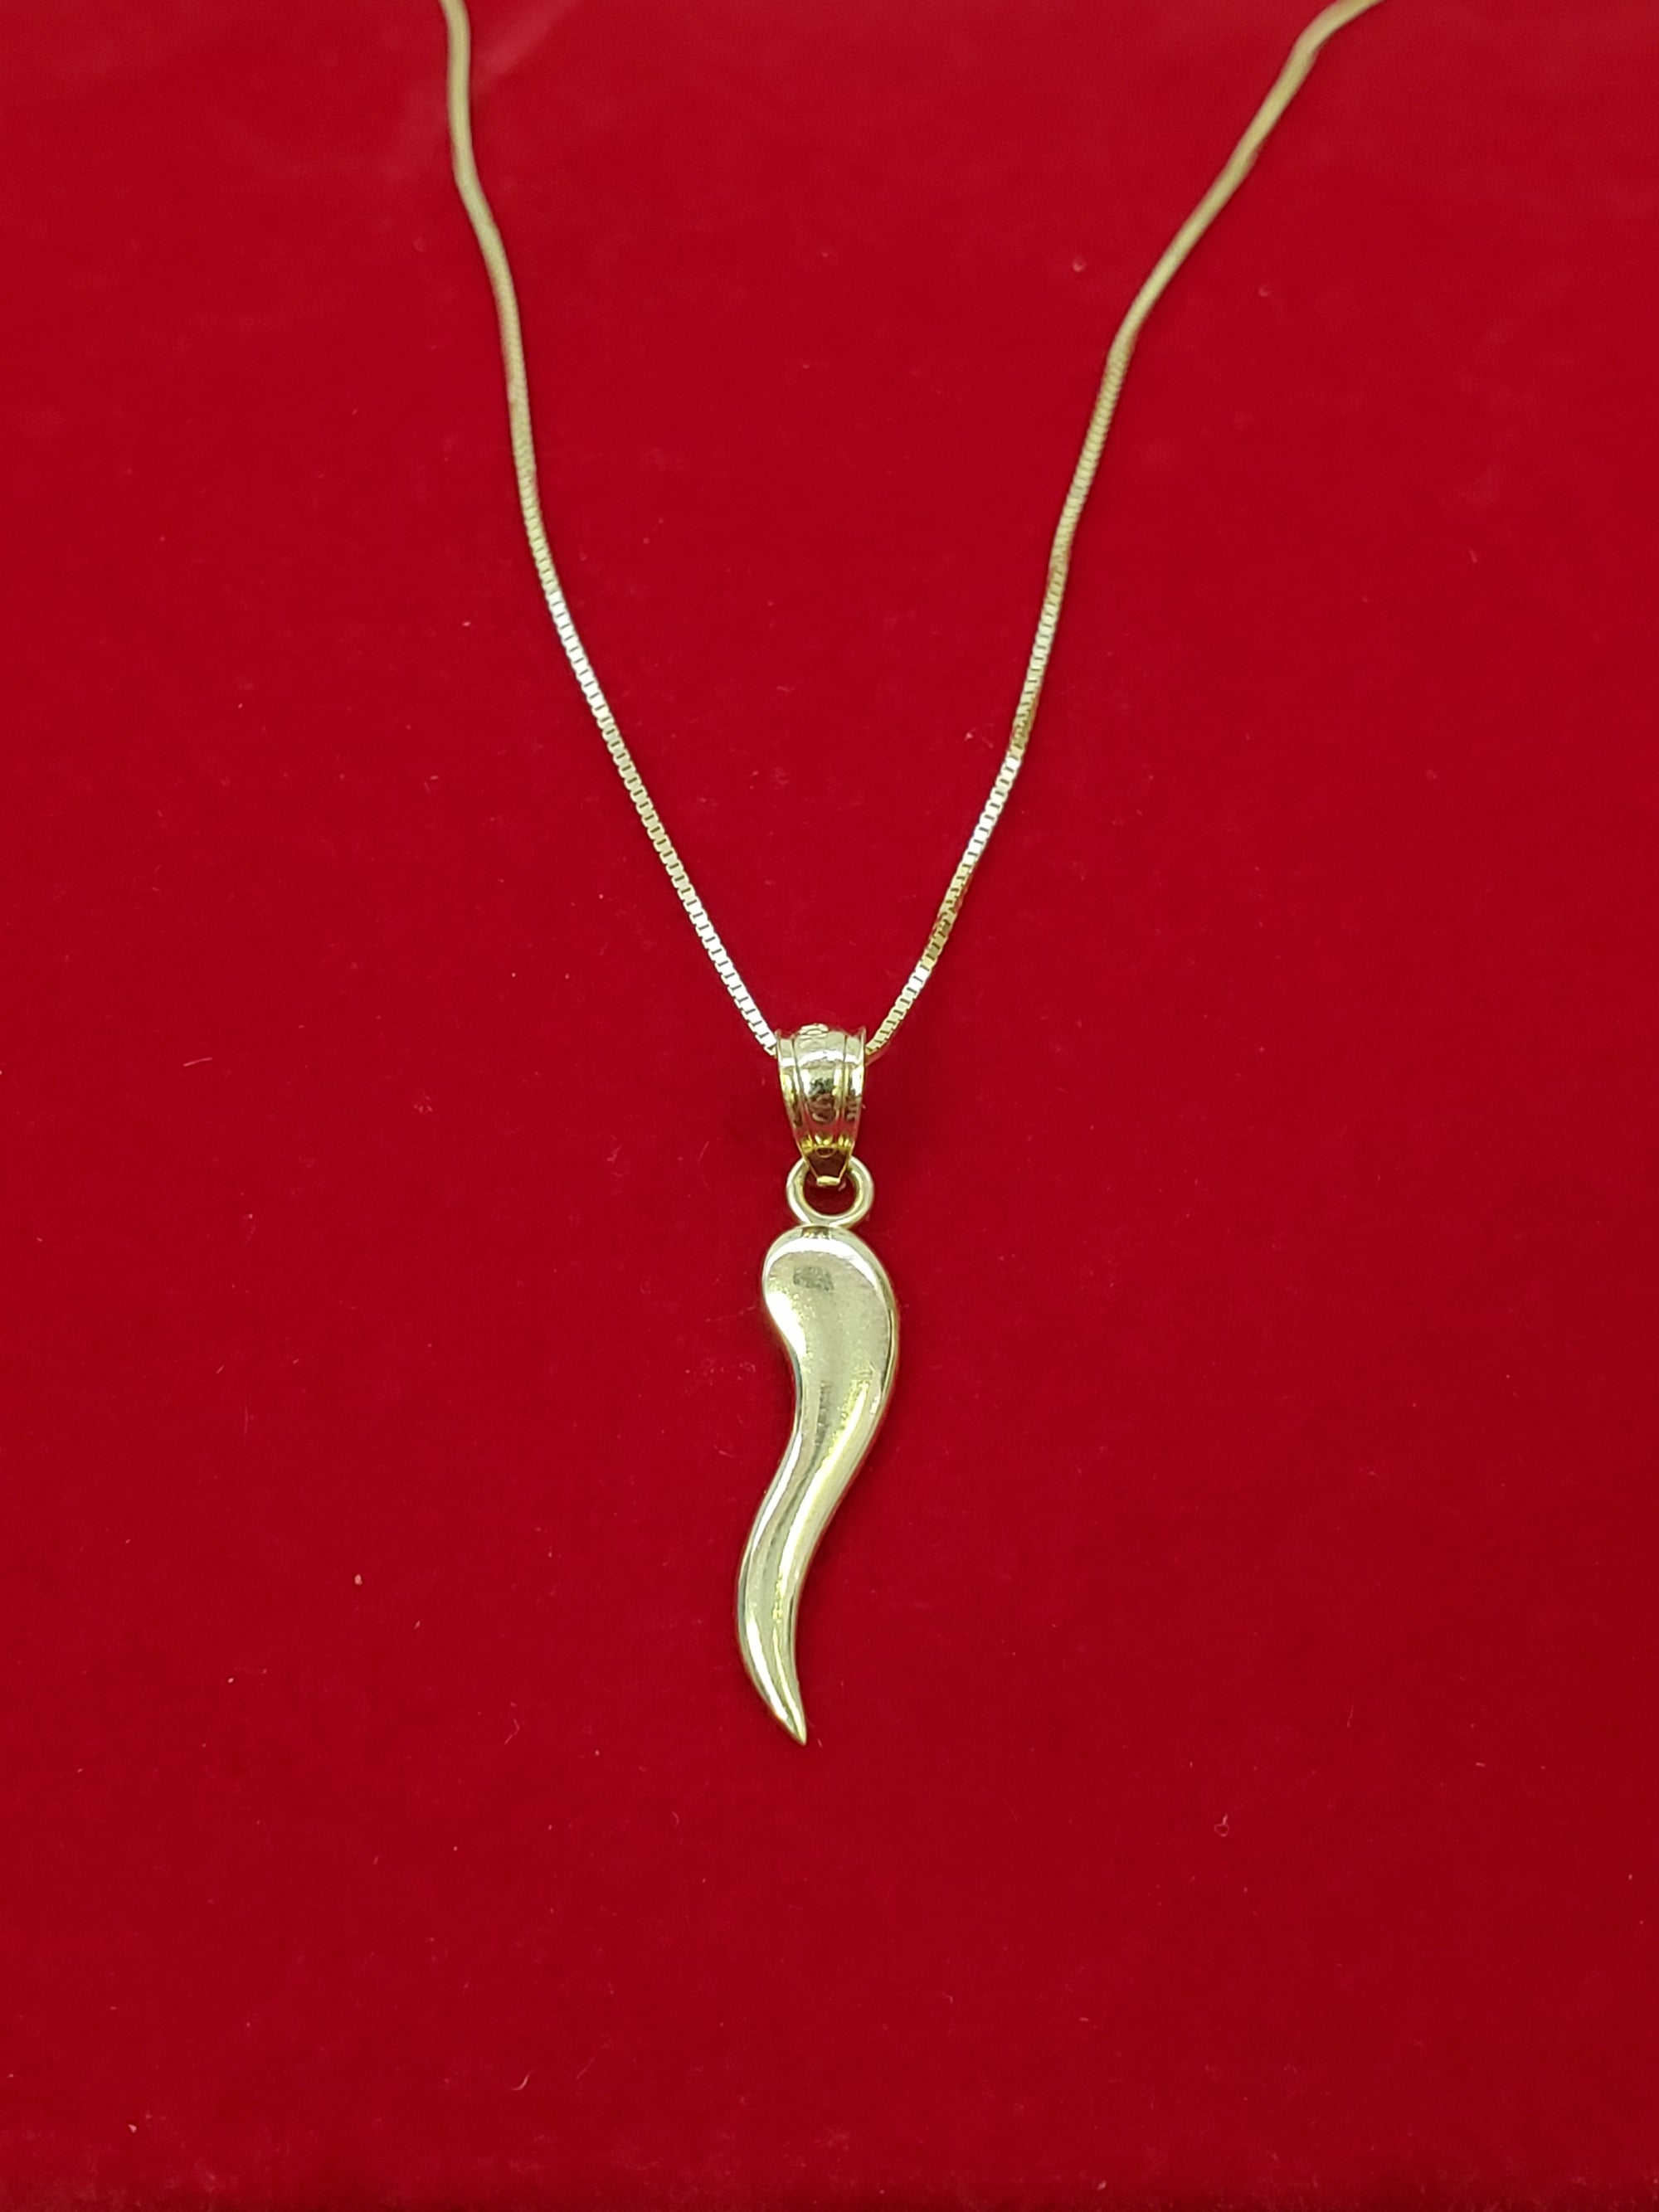 10K Real Gold Italian Horn Small Charm with Box Chain